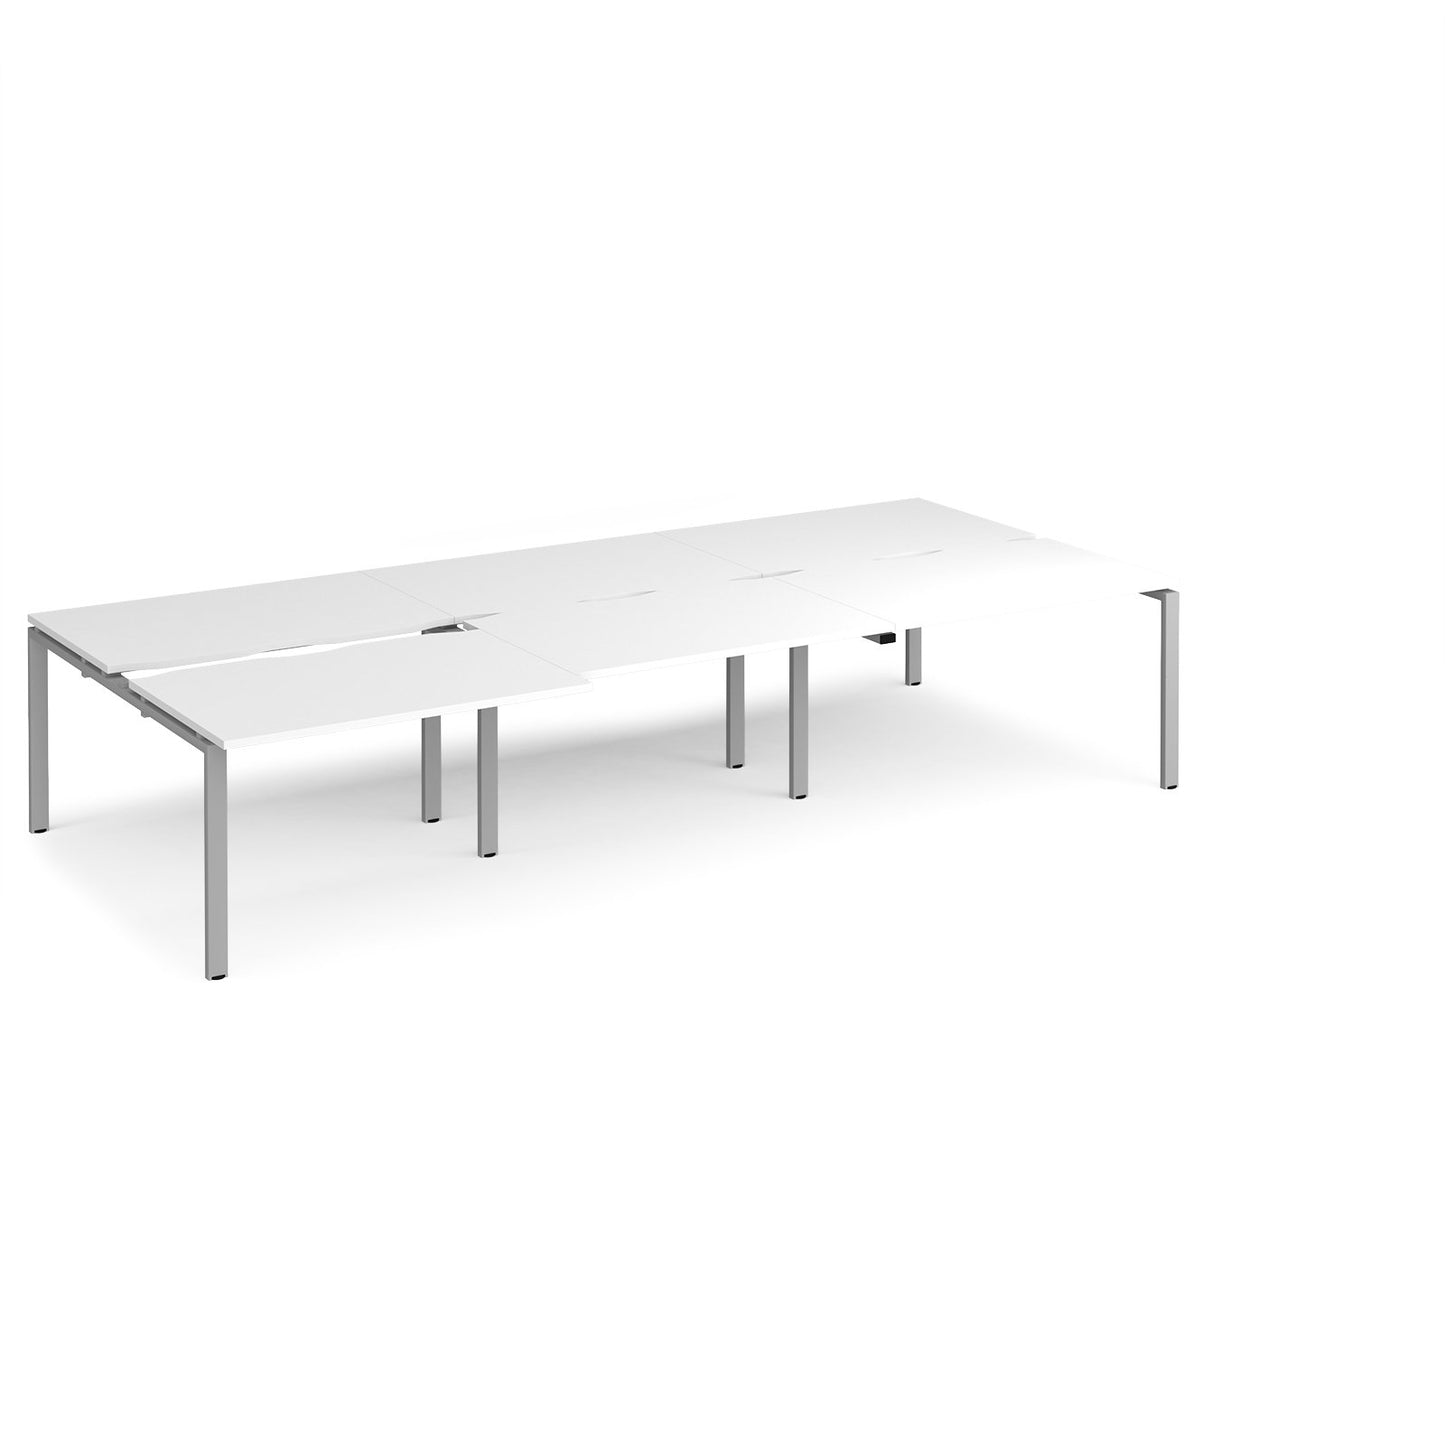 6 Persons - Adapt triple back to back desk 1600mm deep